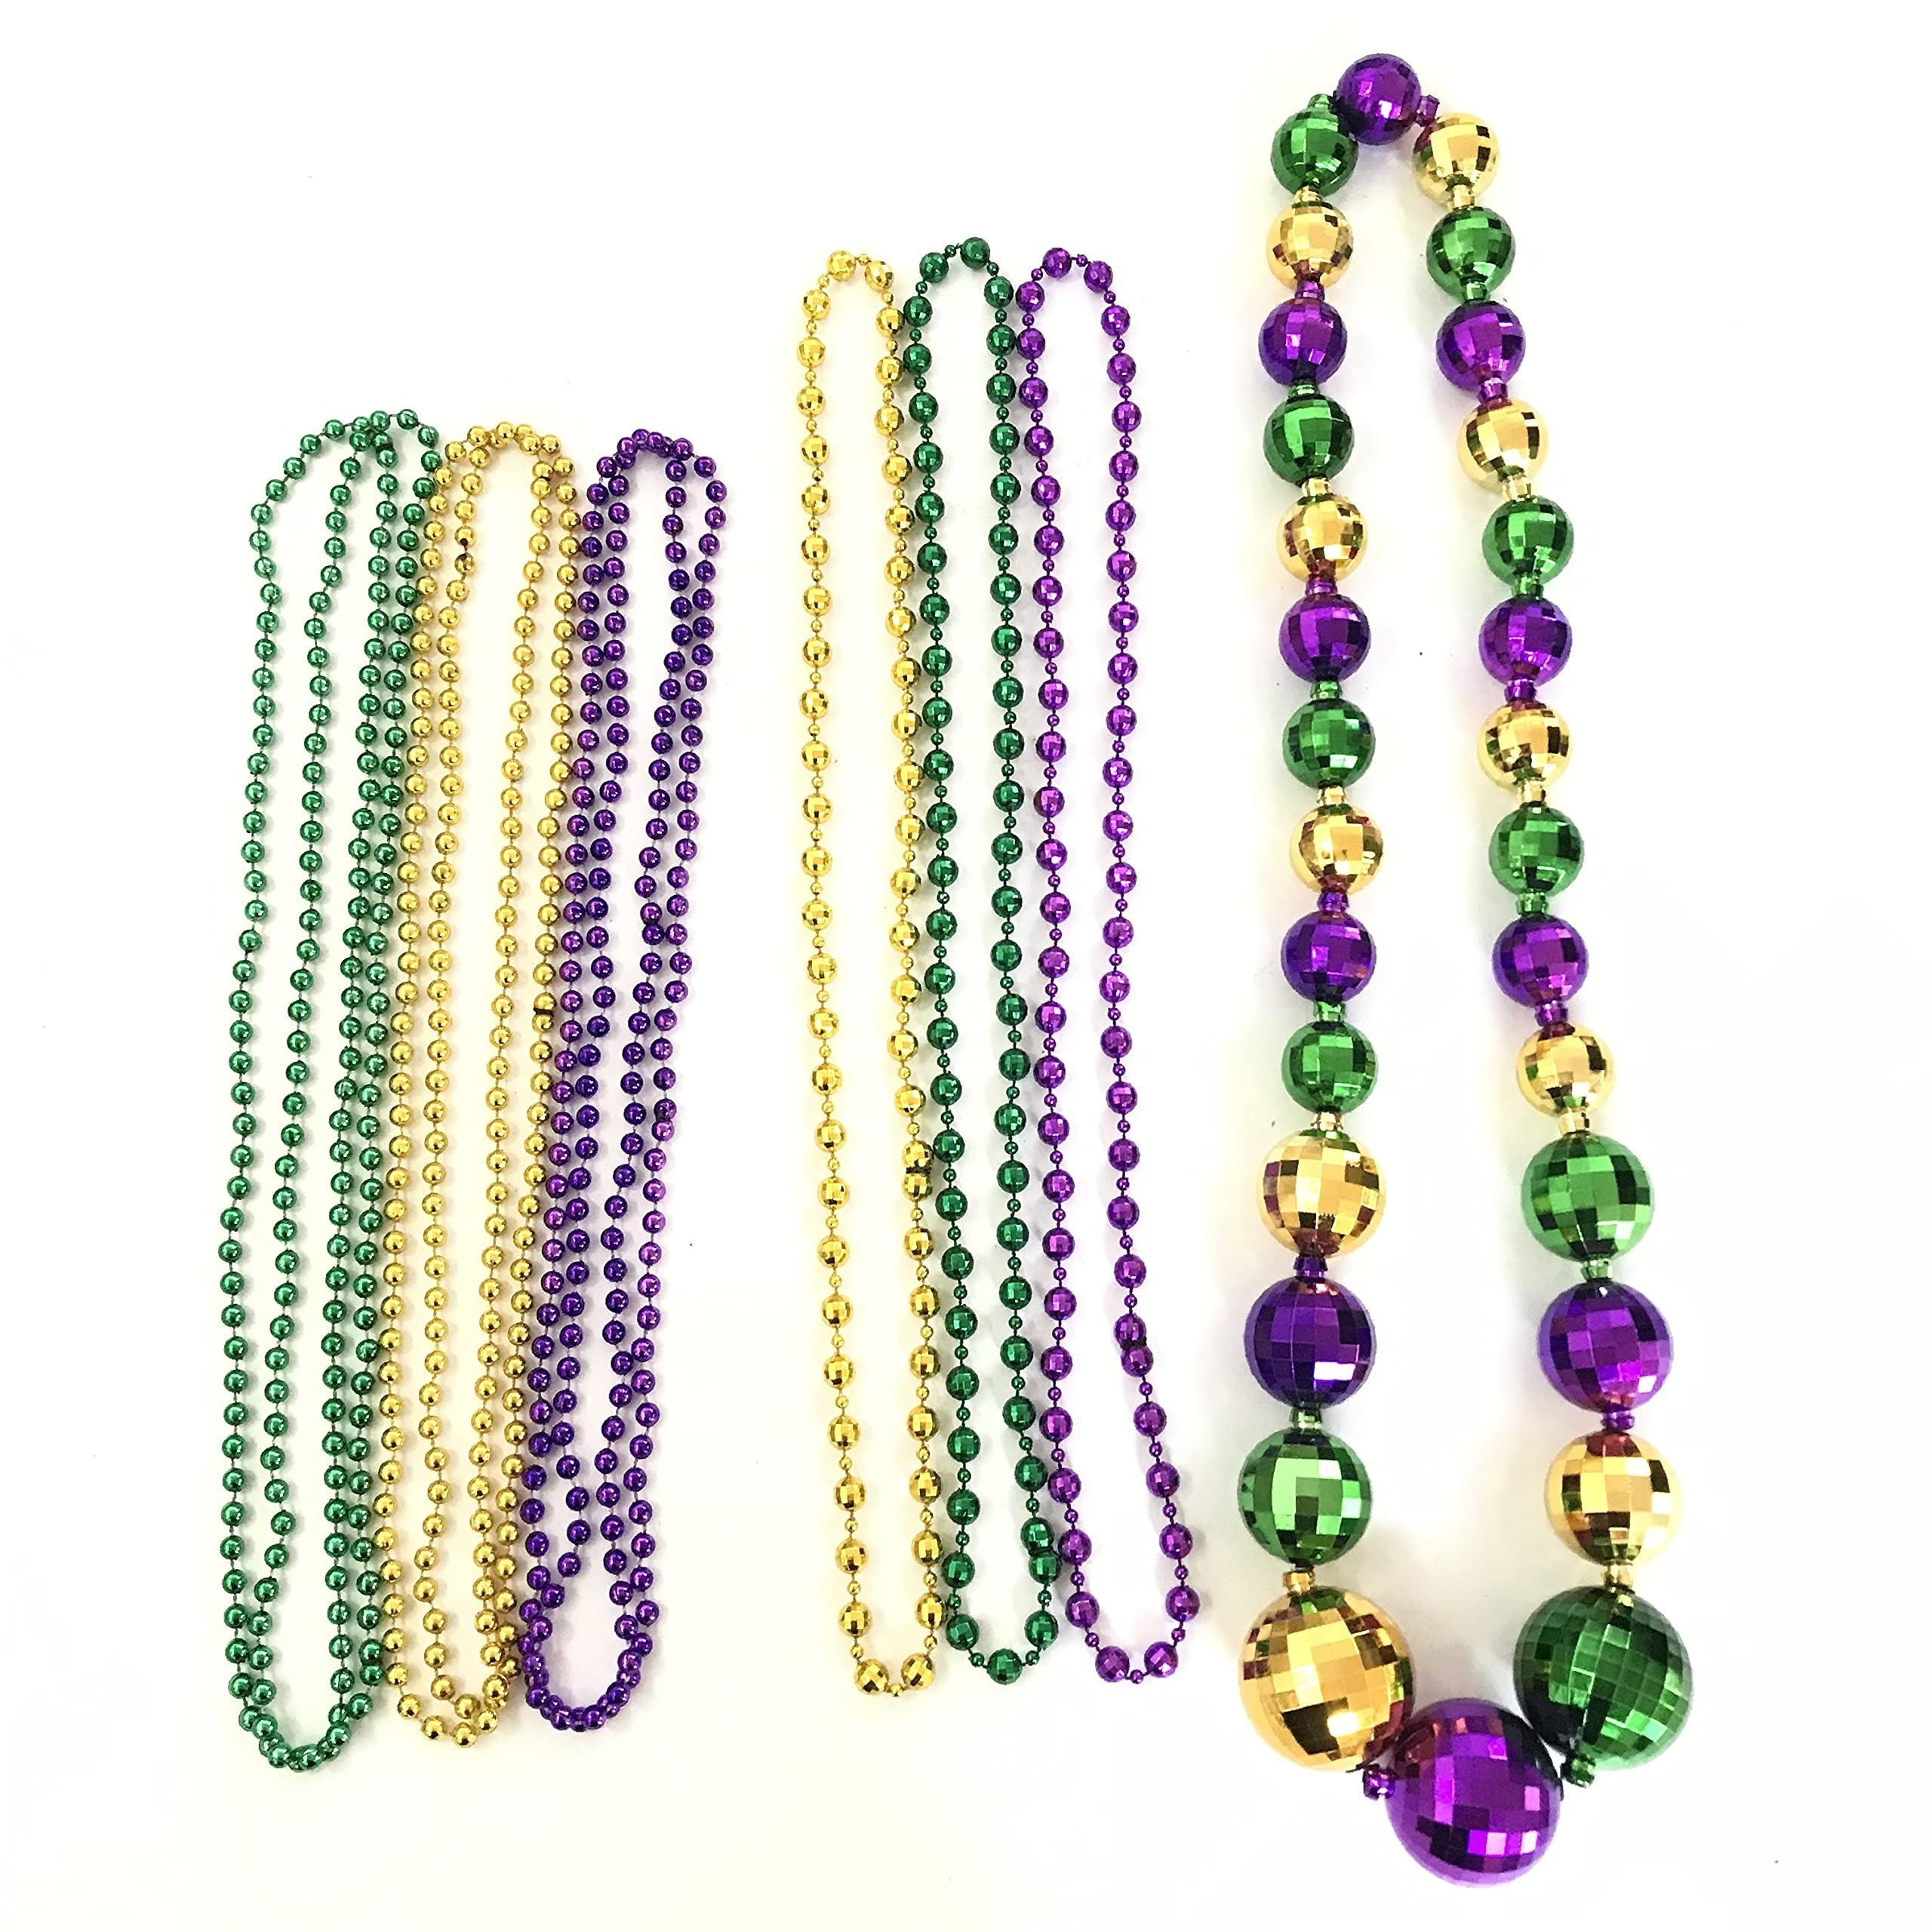 24pcs 33 Inch 7 mm Metallic Purple Bead Necklaces, Mardi Gras Beads Bulk  Round Beaded Necklaces Costume Necklace for Mardi Gras Party Christmas  Festive Events, Party Favors